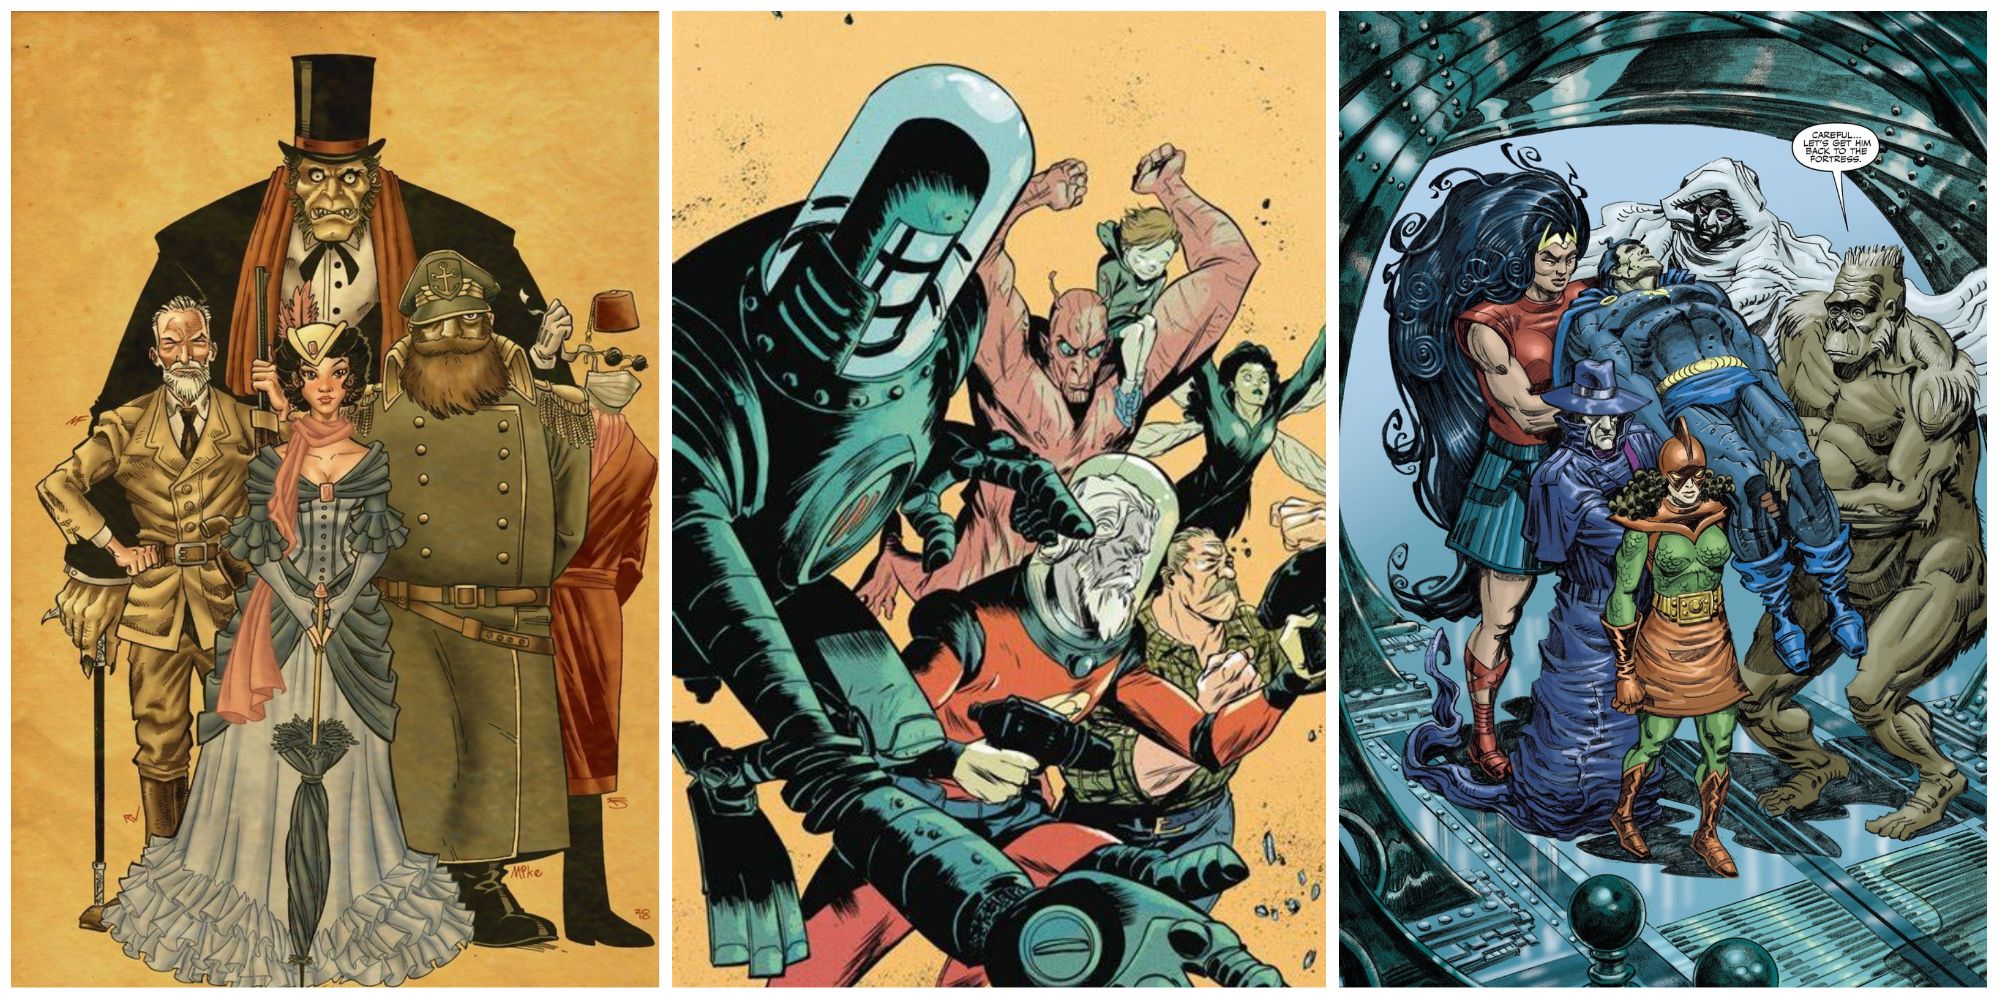 A split image of indie comic covers featuring, the League of Extraordinary Gentlemen, the Black Hammer, and the Atomic Legion